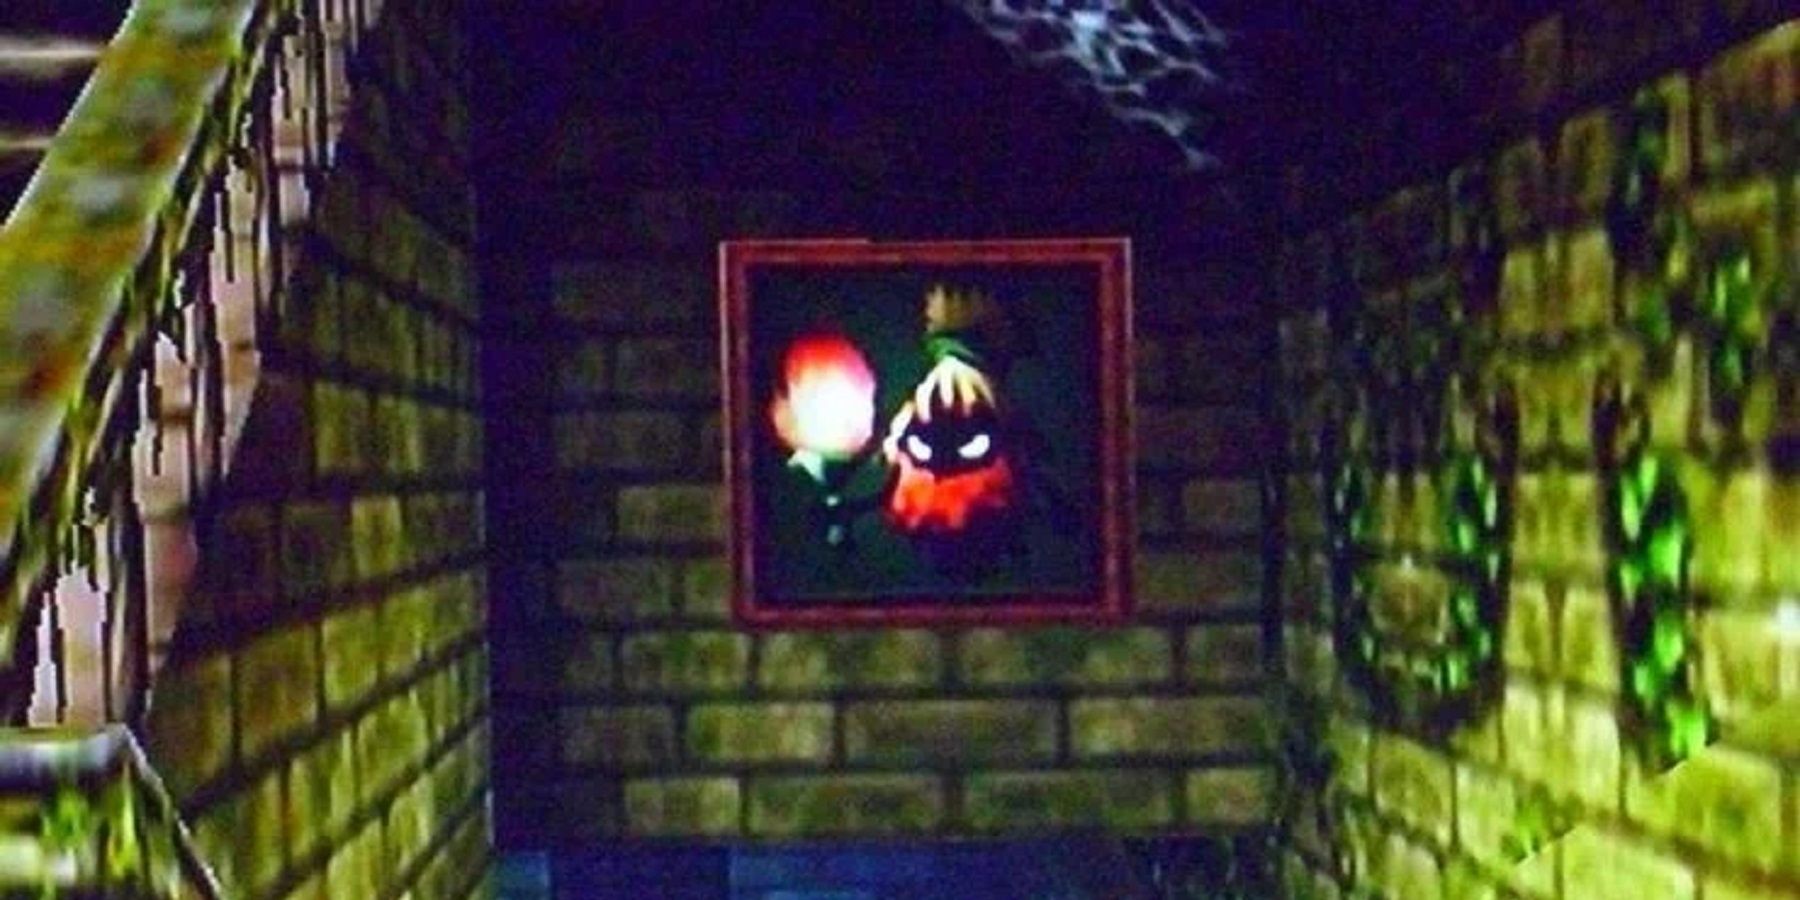 The ghost painting from Ocarina of Time's Forest Temple, which appears to depict a Poe.